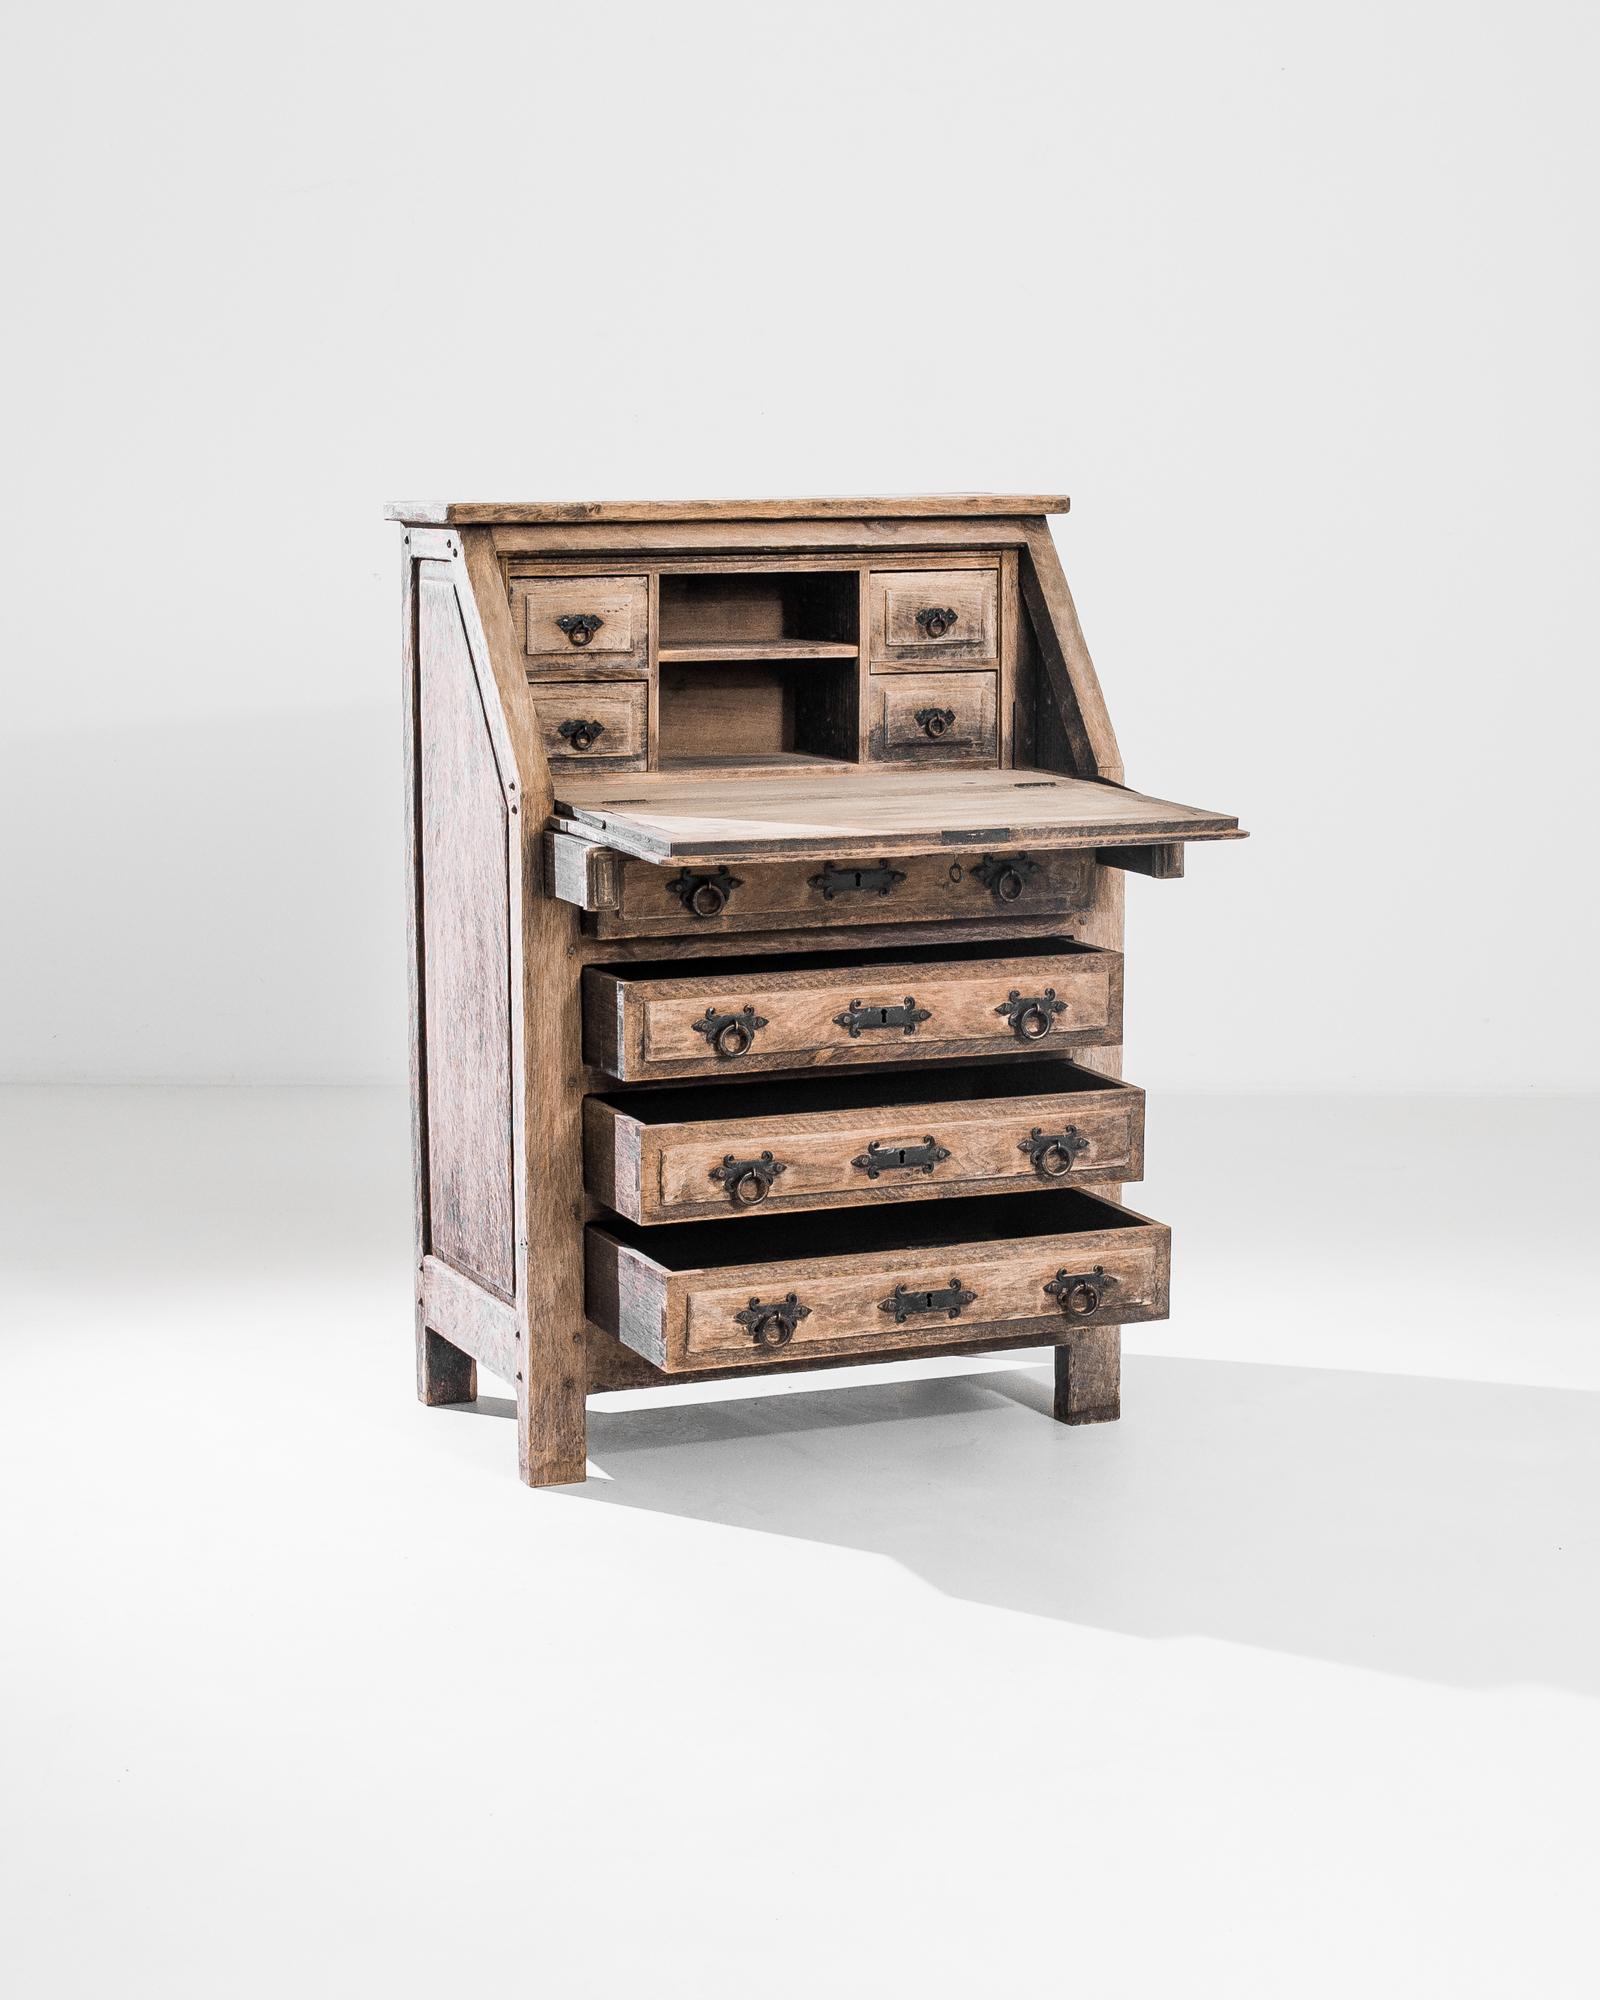 Intriguing complexity of form characterizes this desk crafted in Belgium in the 1970s. This bleached oak chest adopts an unconventional geometric shape with four drawers and a downward top door that hides six extra compartments. Original iron